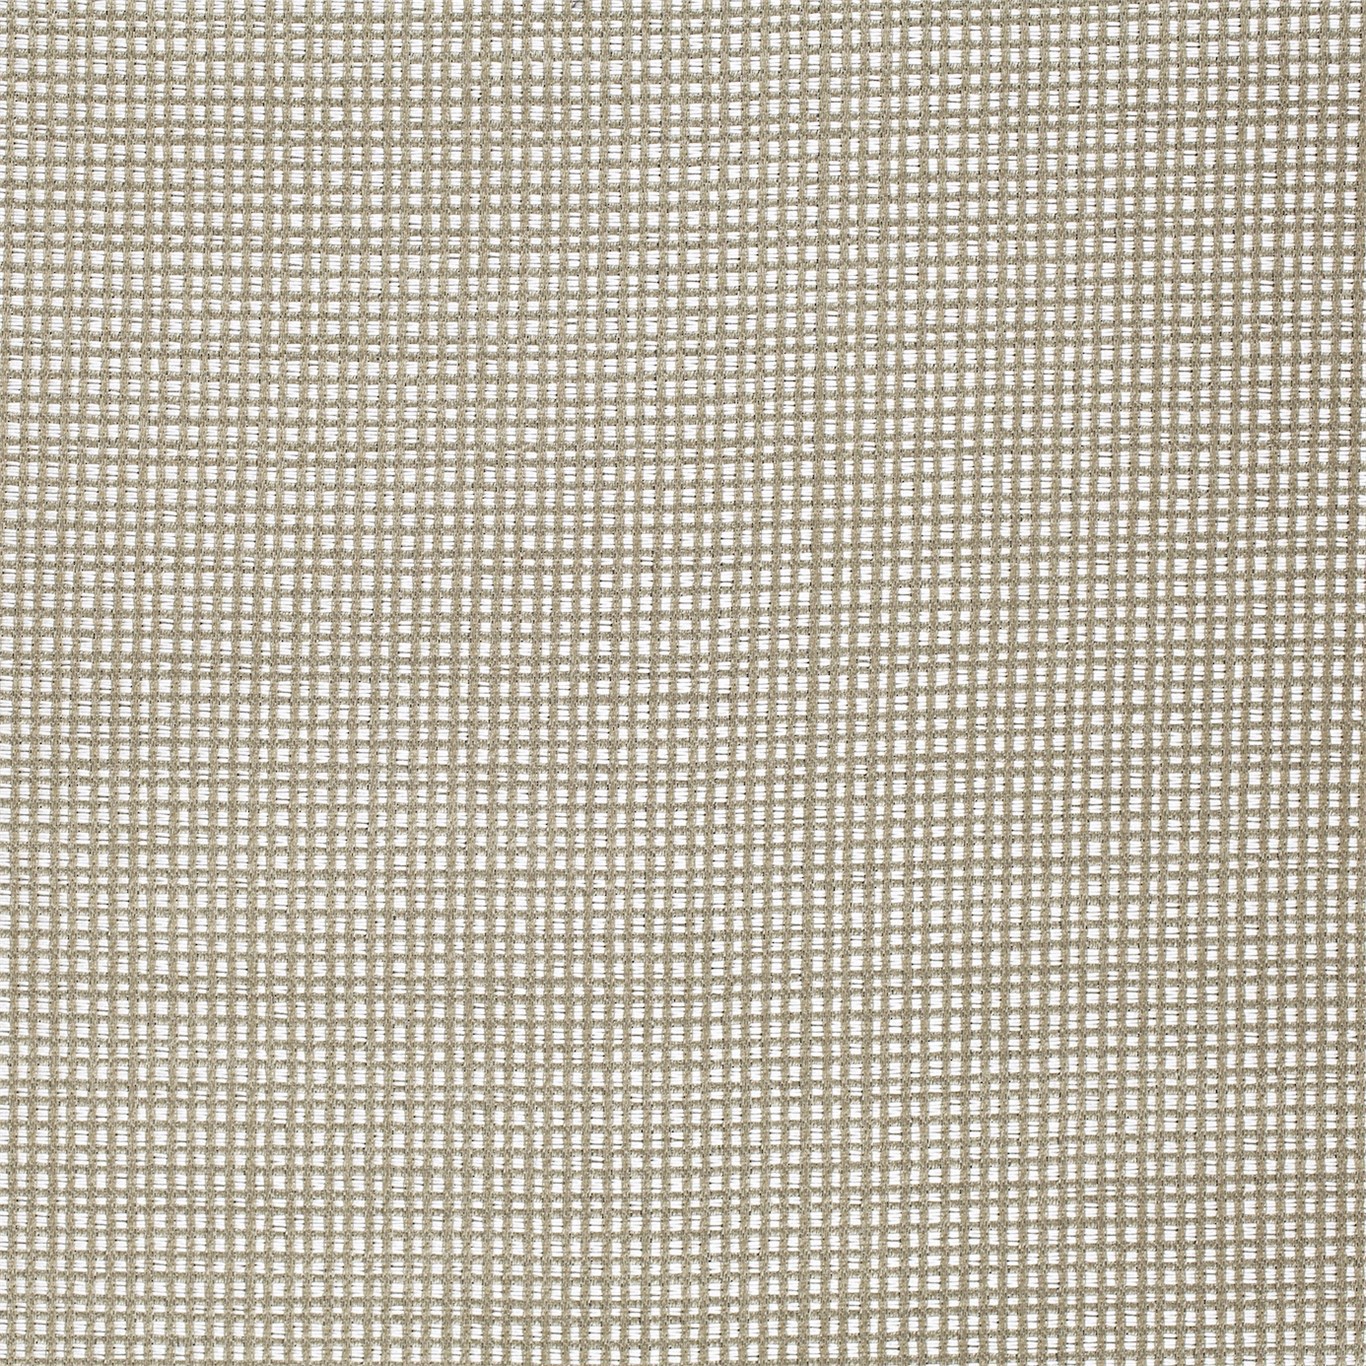 Accents Sepia Fabric by HAR